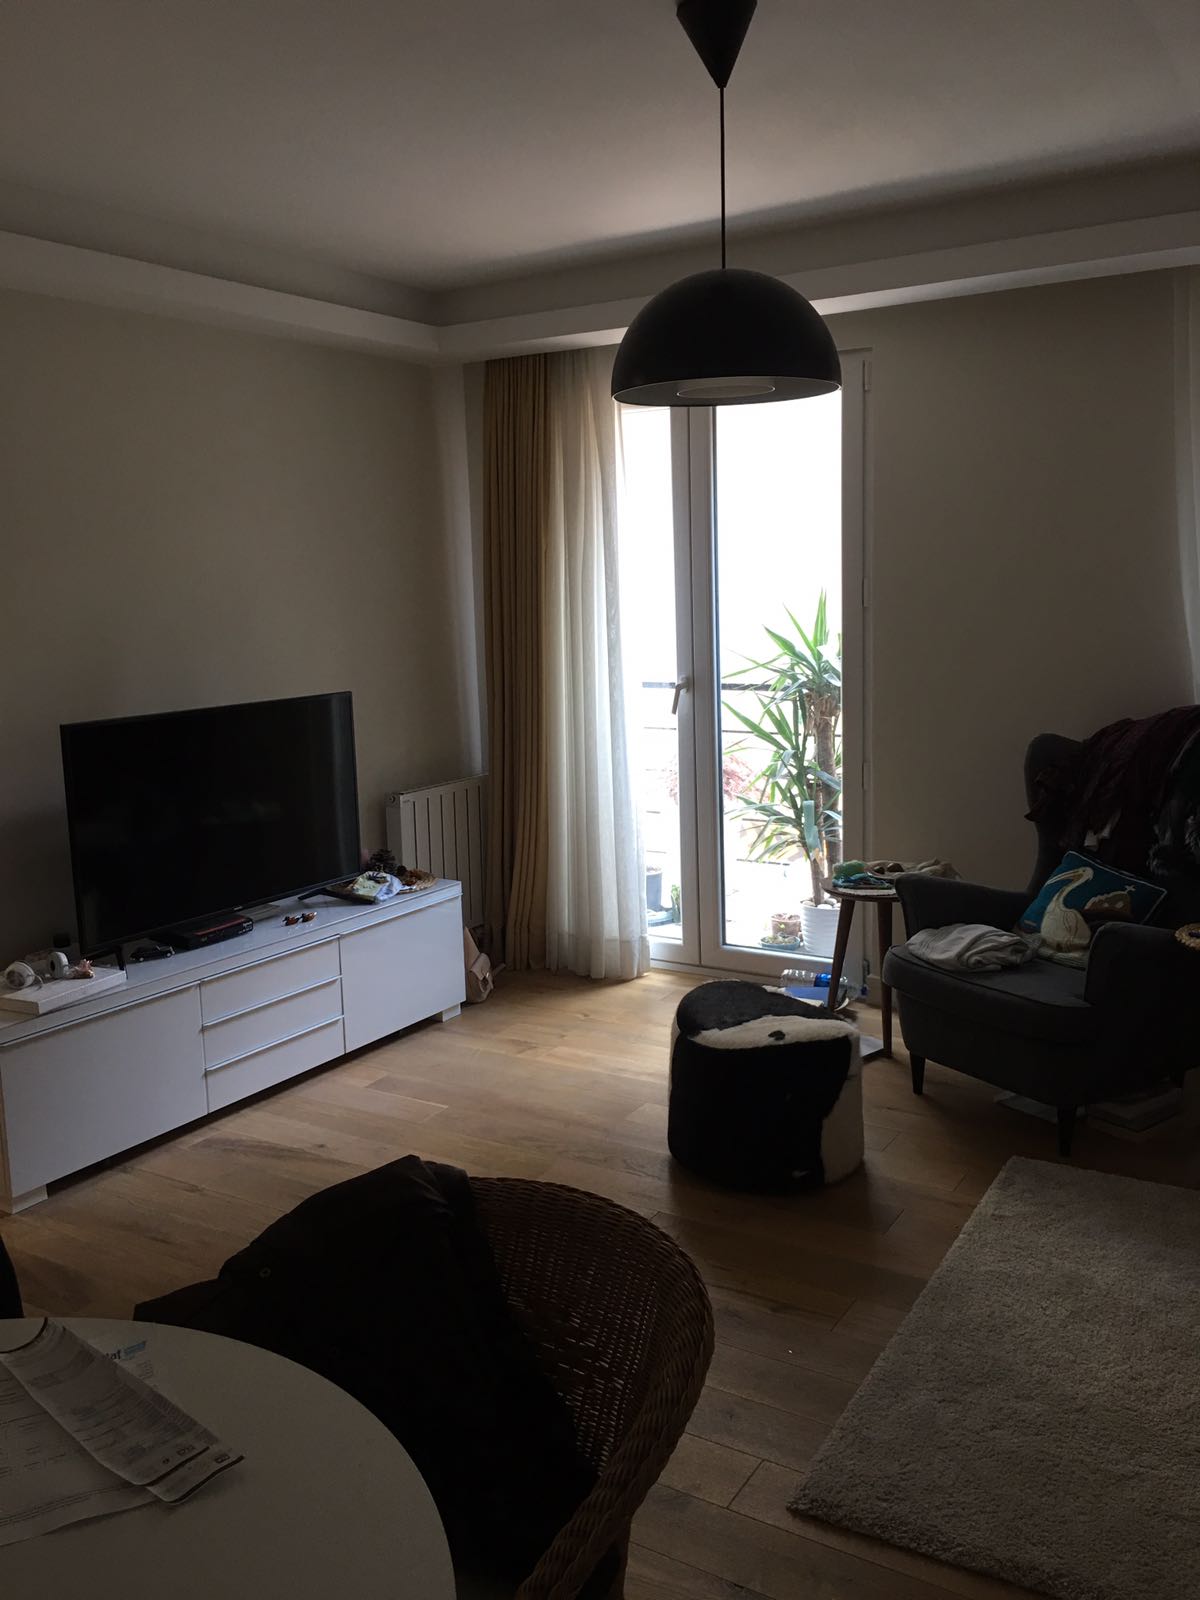 Property for sale etiler istanbul